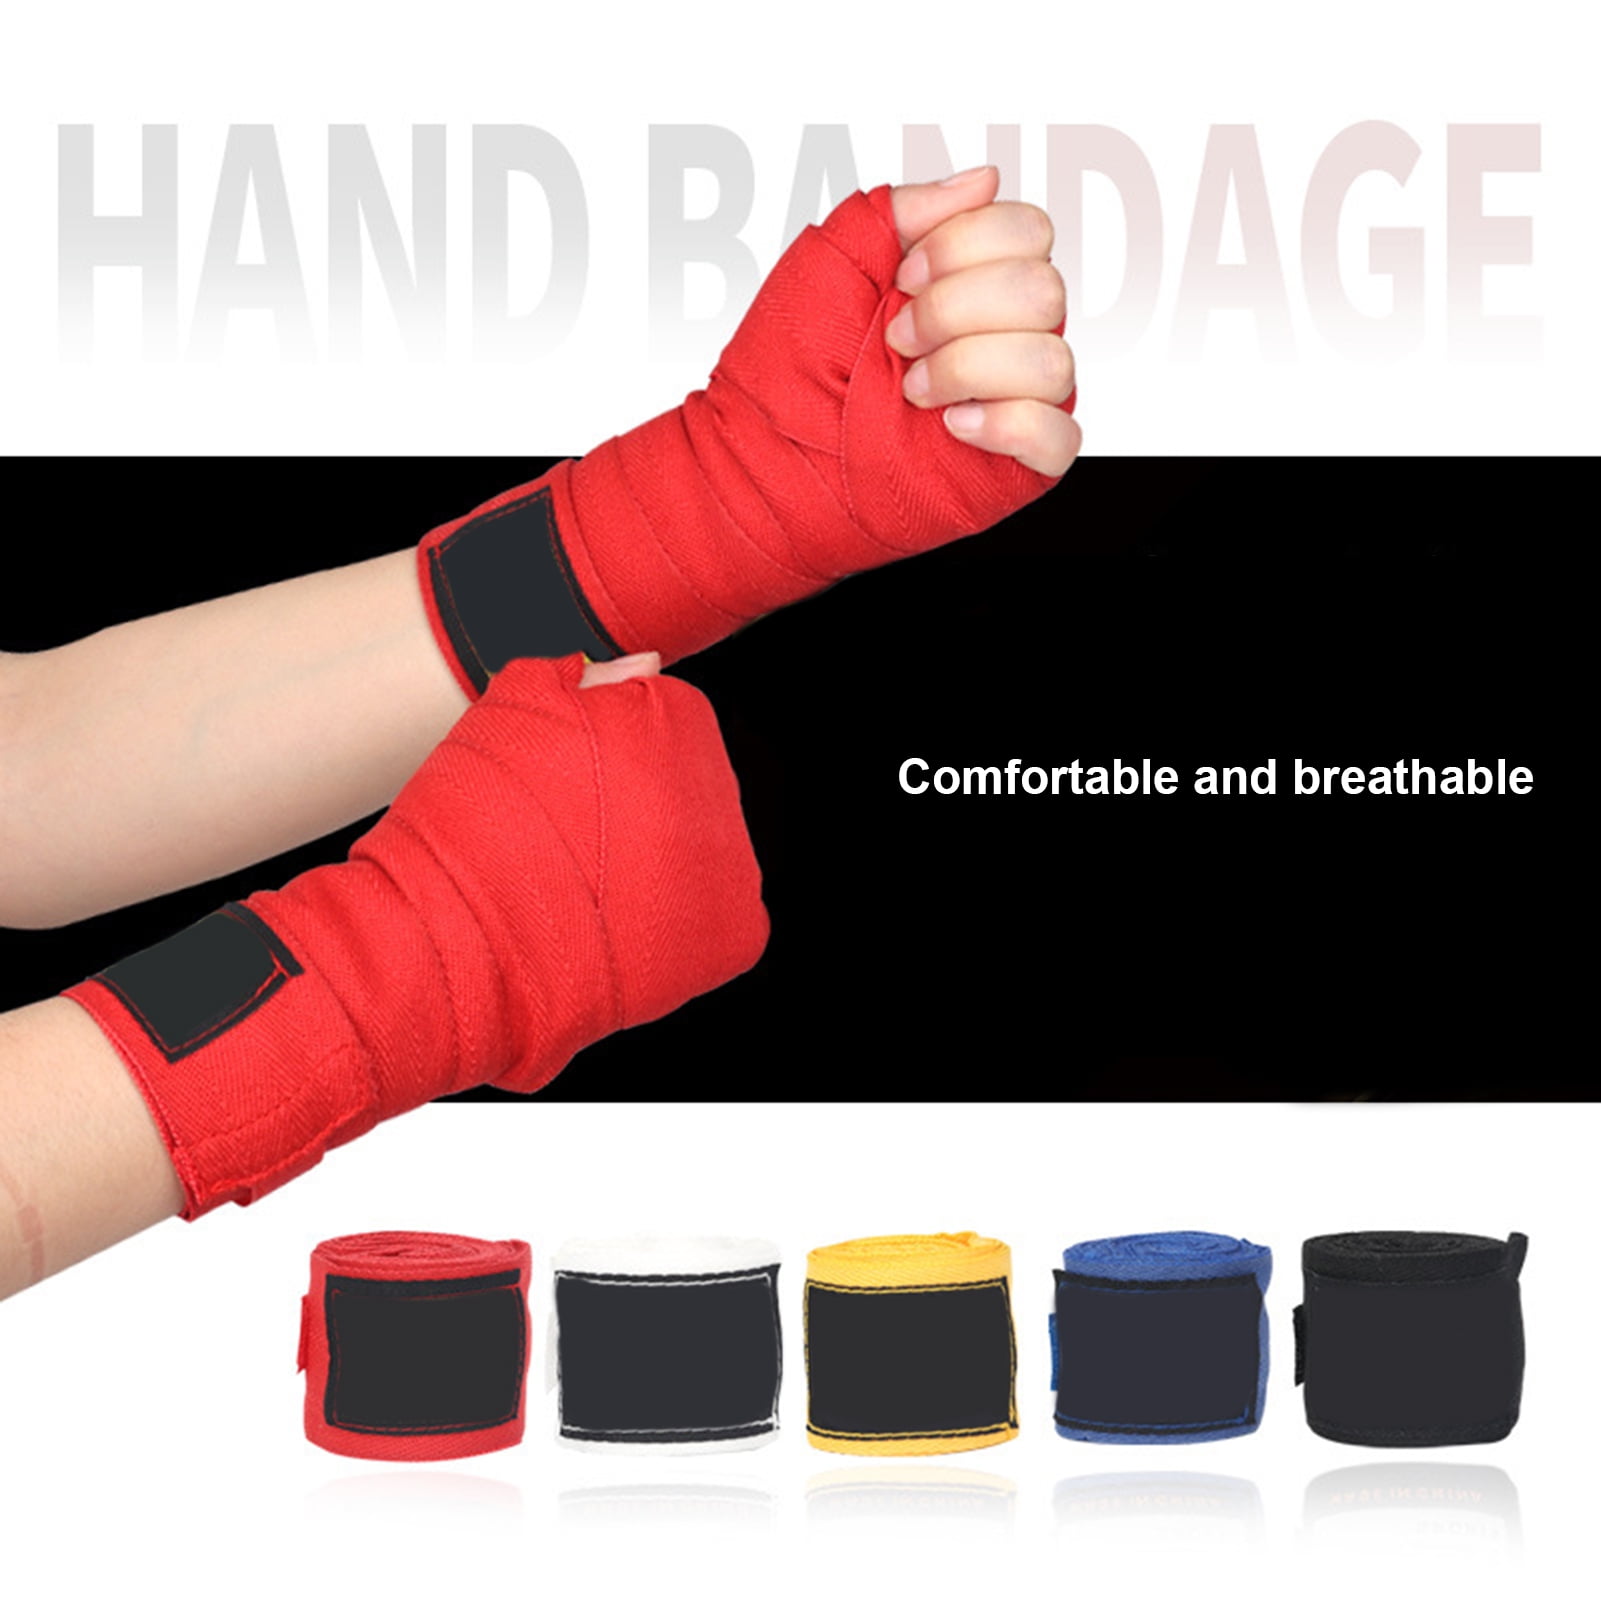 Wrist Support Injury Protection Quick Wraps MMA Boxing Bandages Strap Hand Wraps 